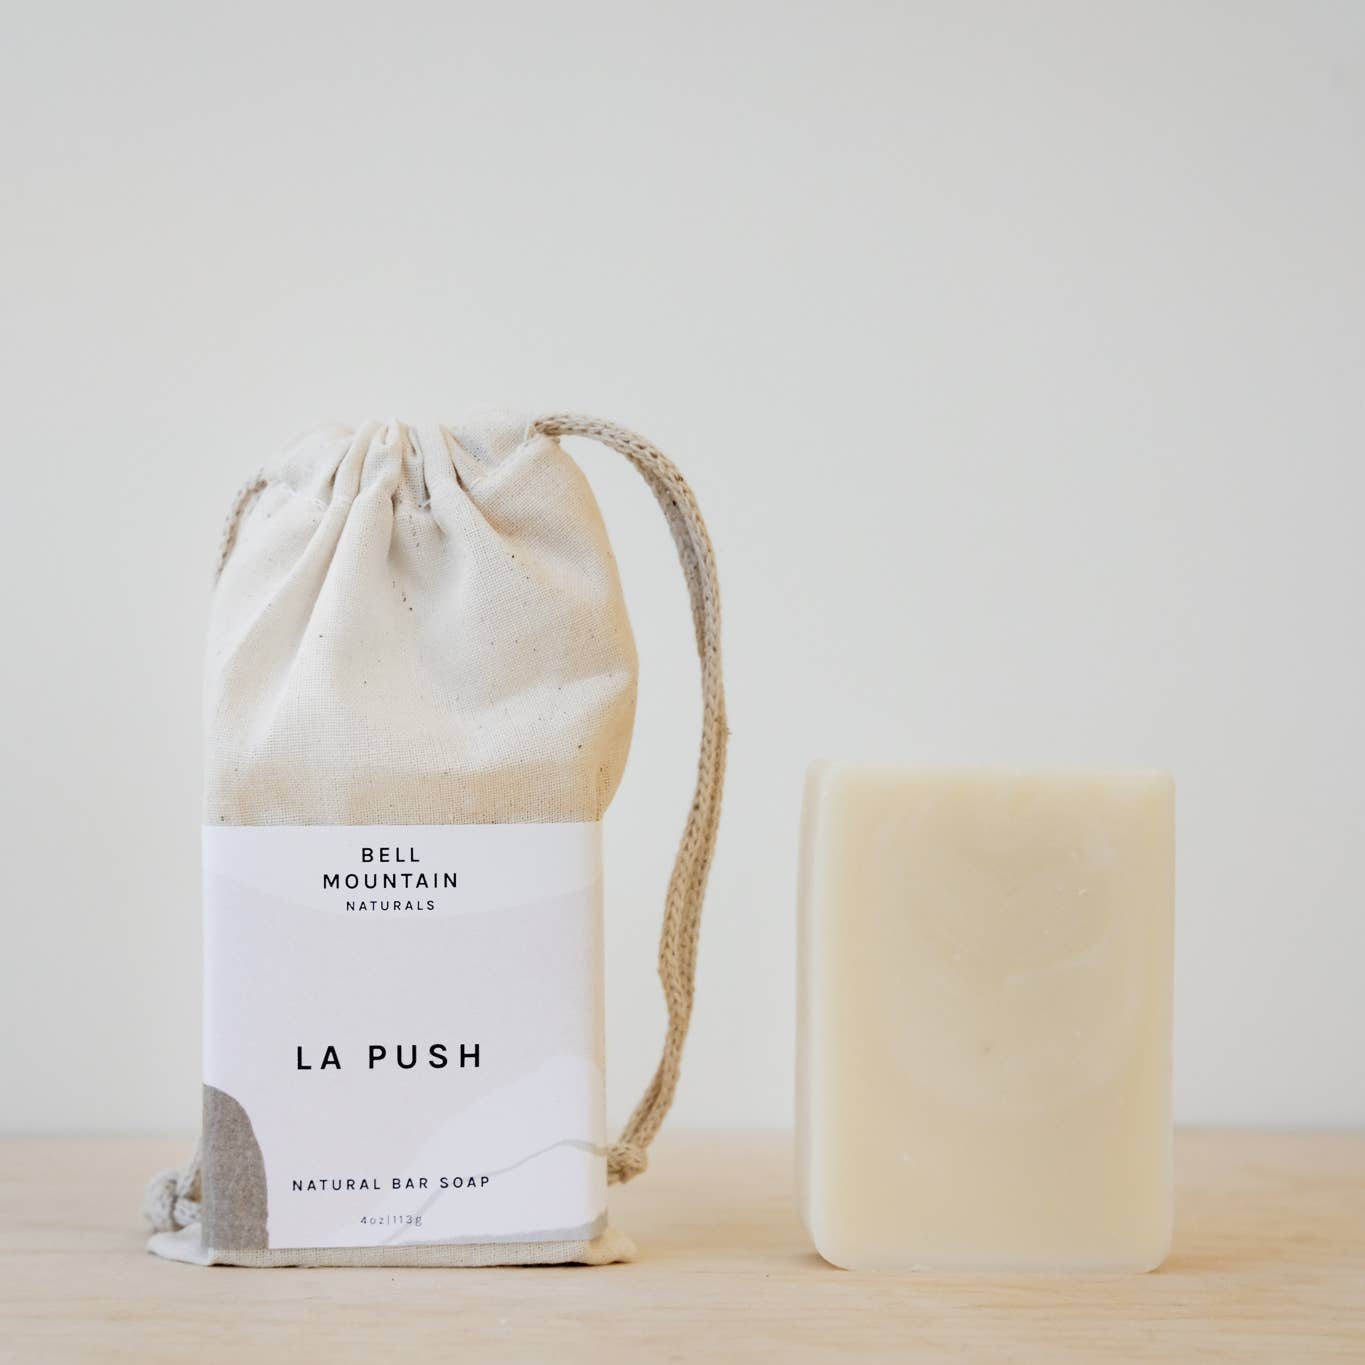 Bell Mountain Naturals' La Push soap bar, shown next to its packaging.